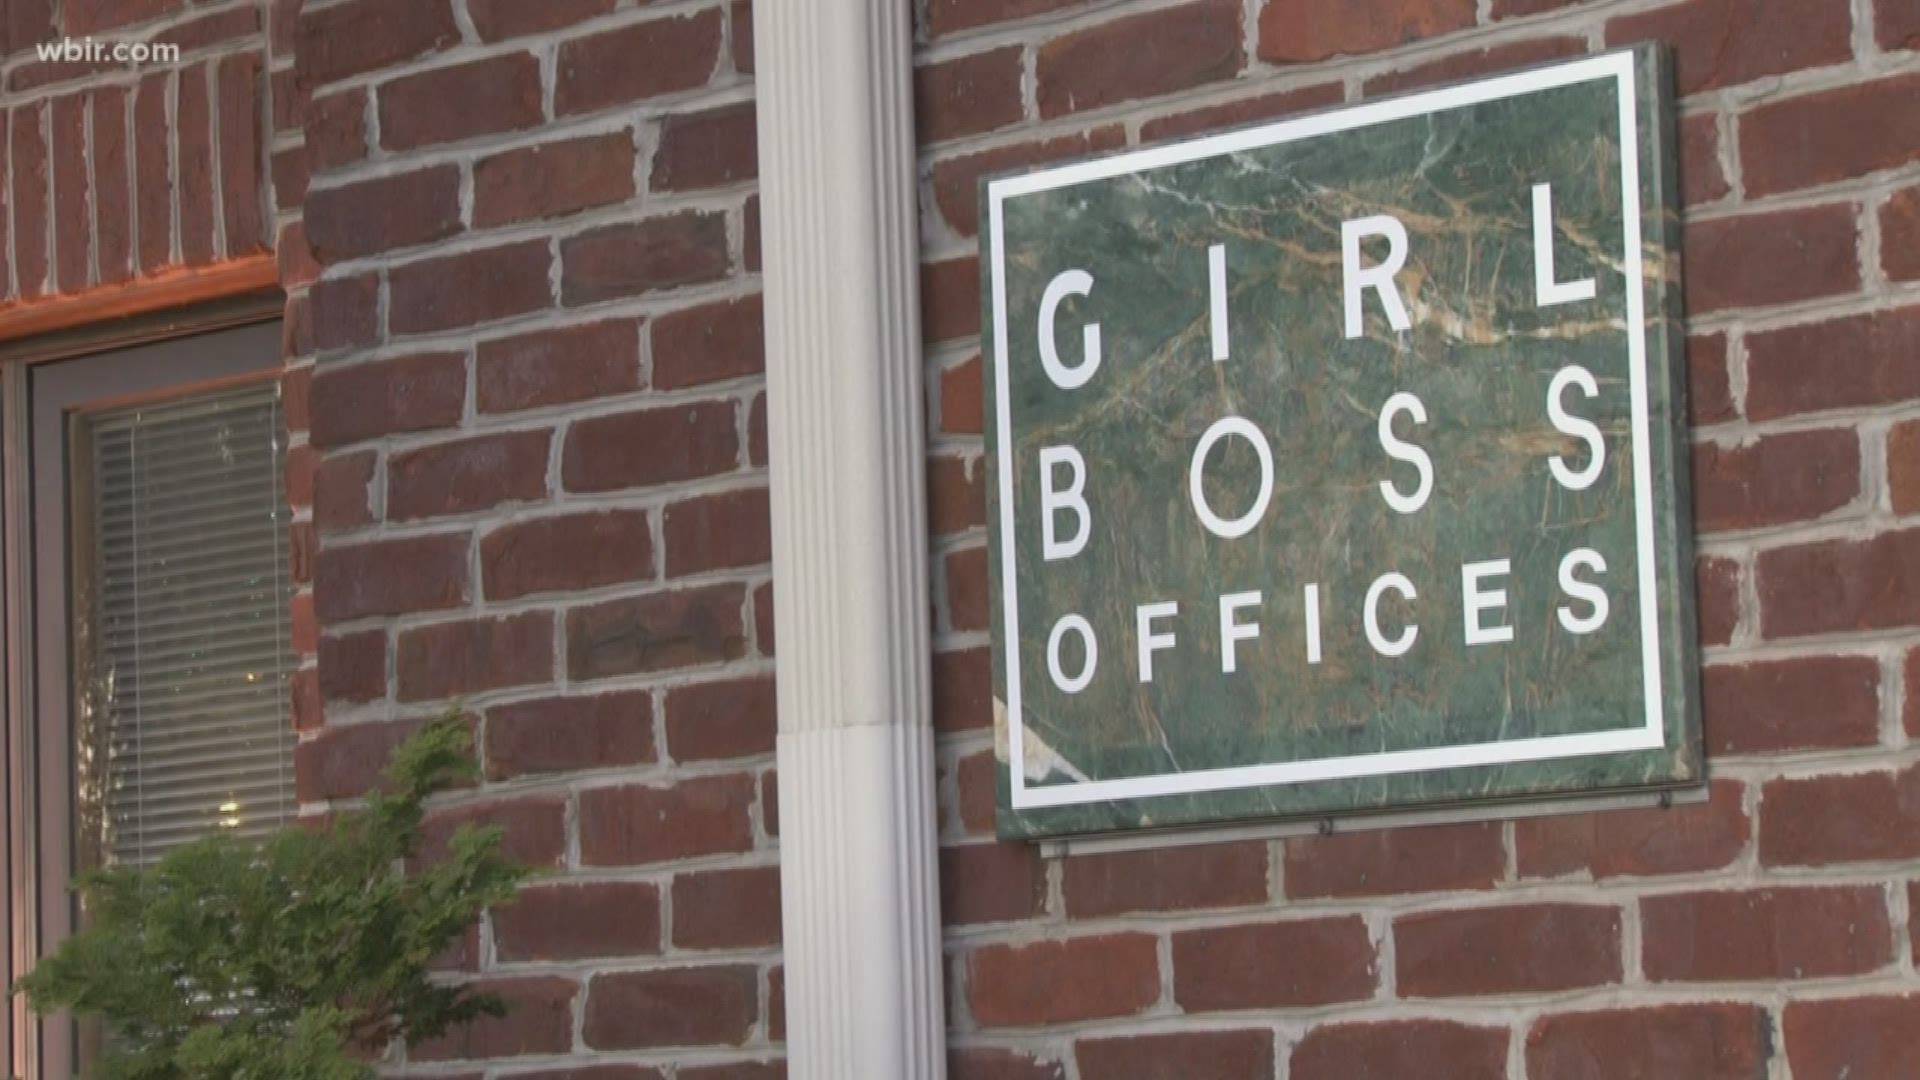 Girl Boss Offices opened its doors this weekend in West Knoxville.